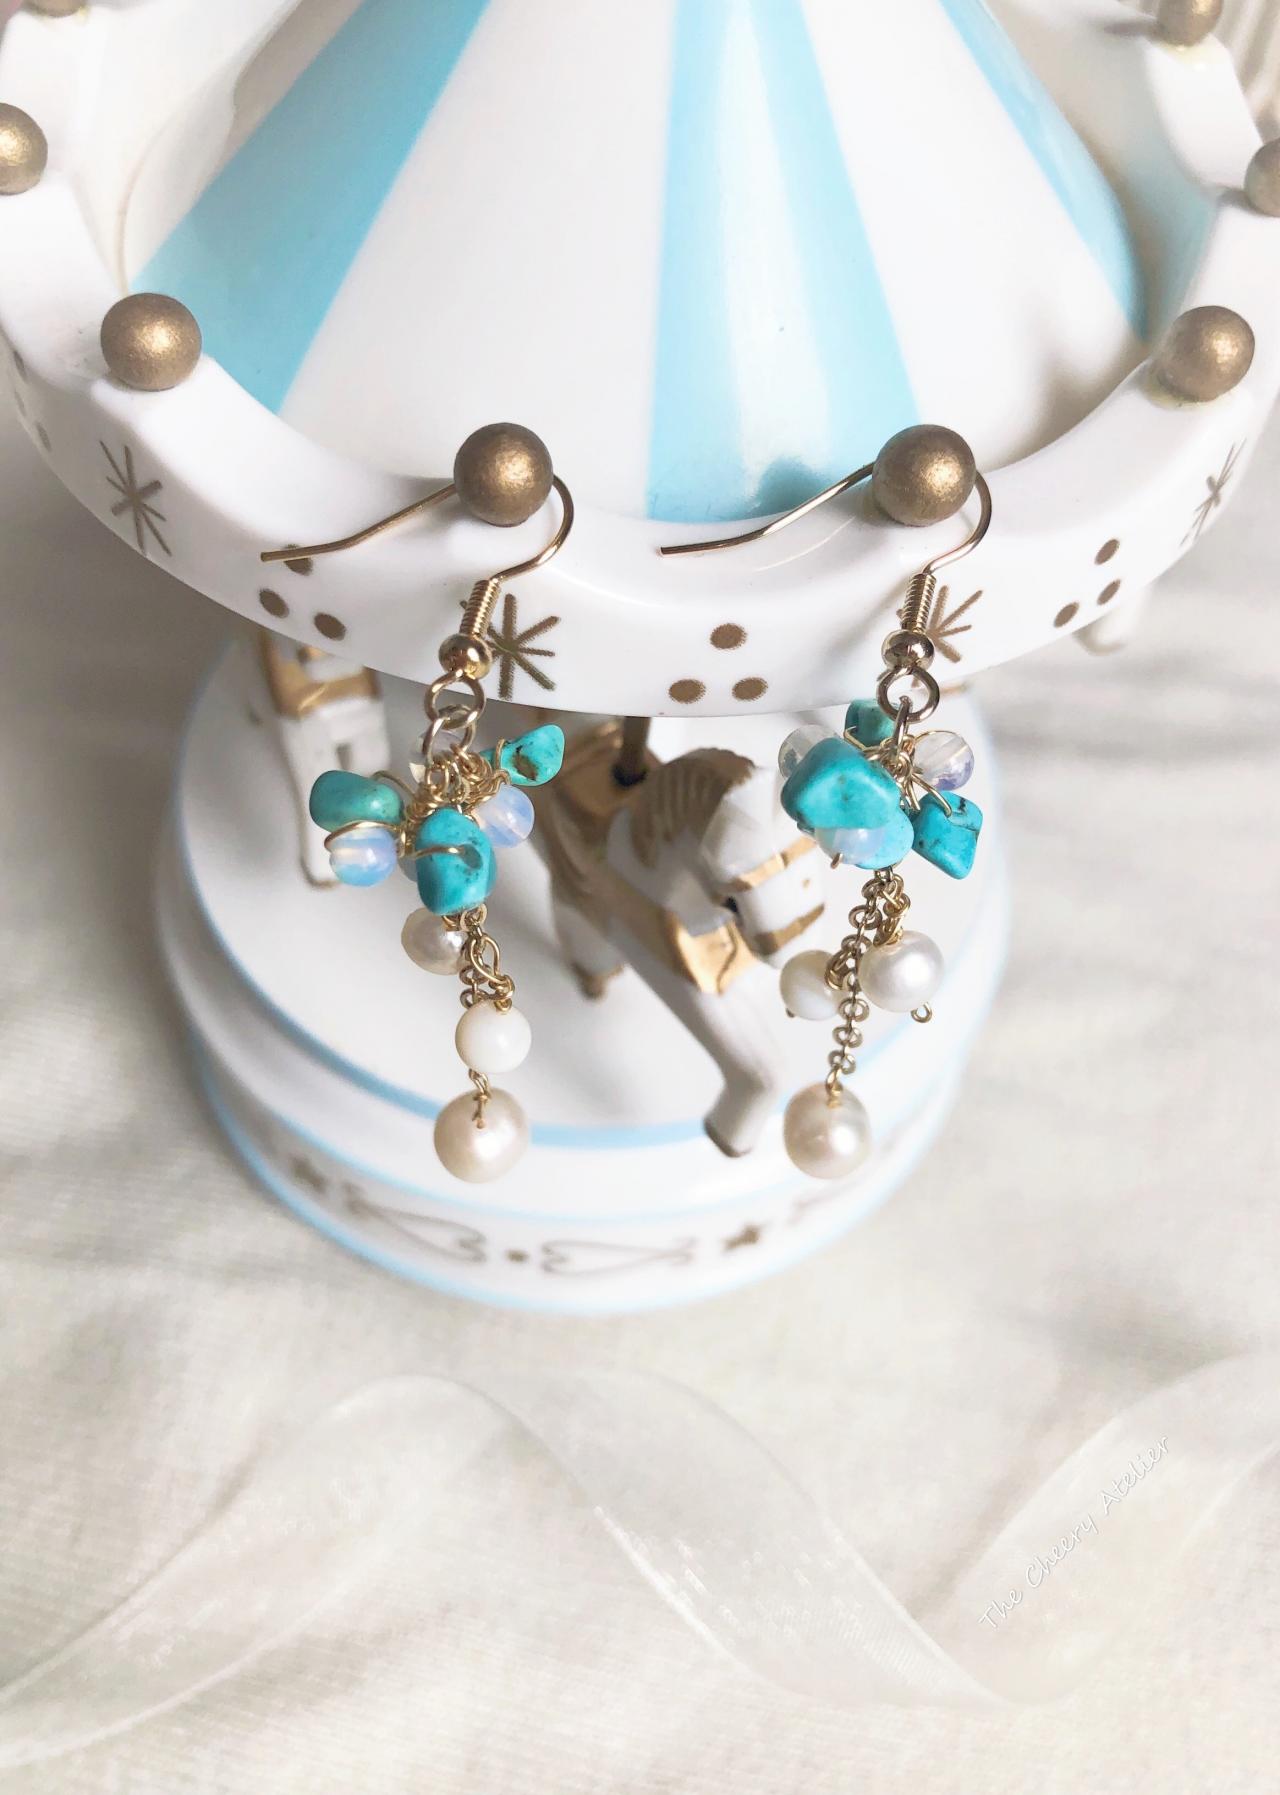 Earrings - Freshwater Pearls, Moonstone, Turquoise Buts, Shell Pearl And 14k Gold Plated, Bridesmaid, Beginnings